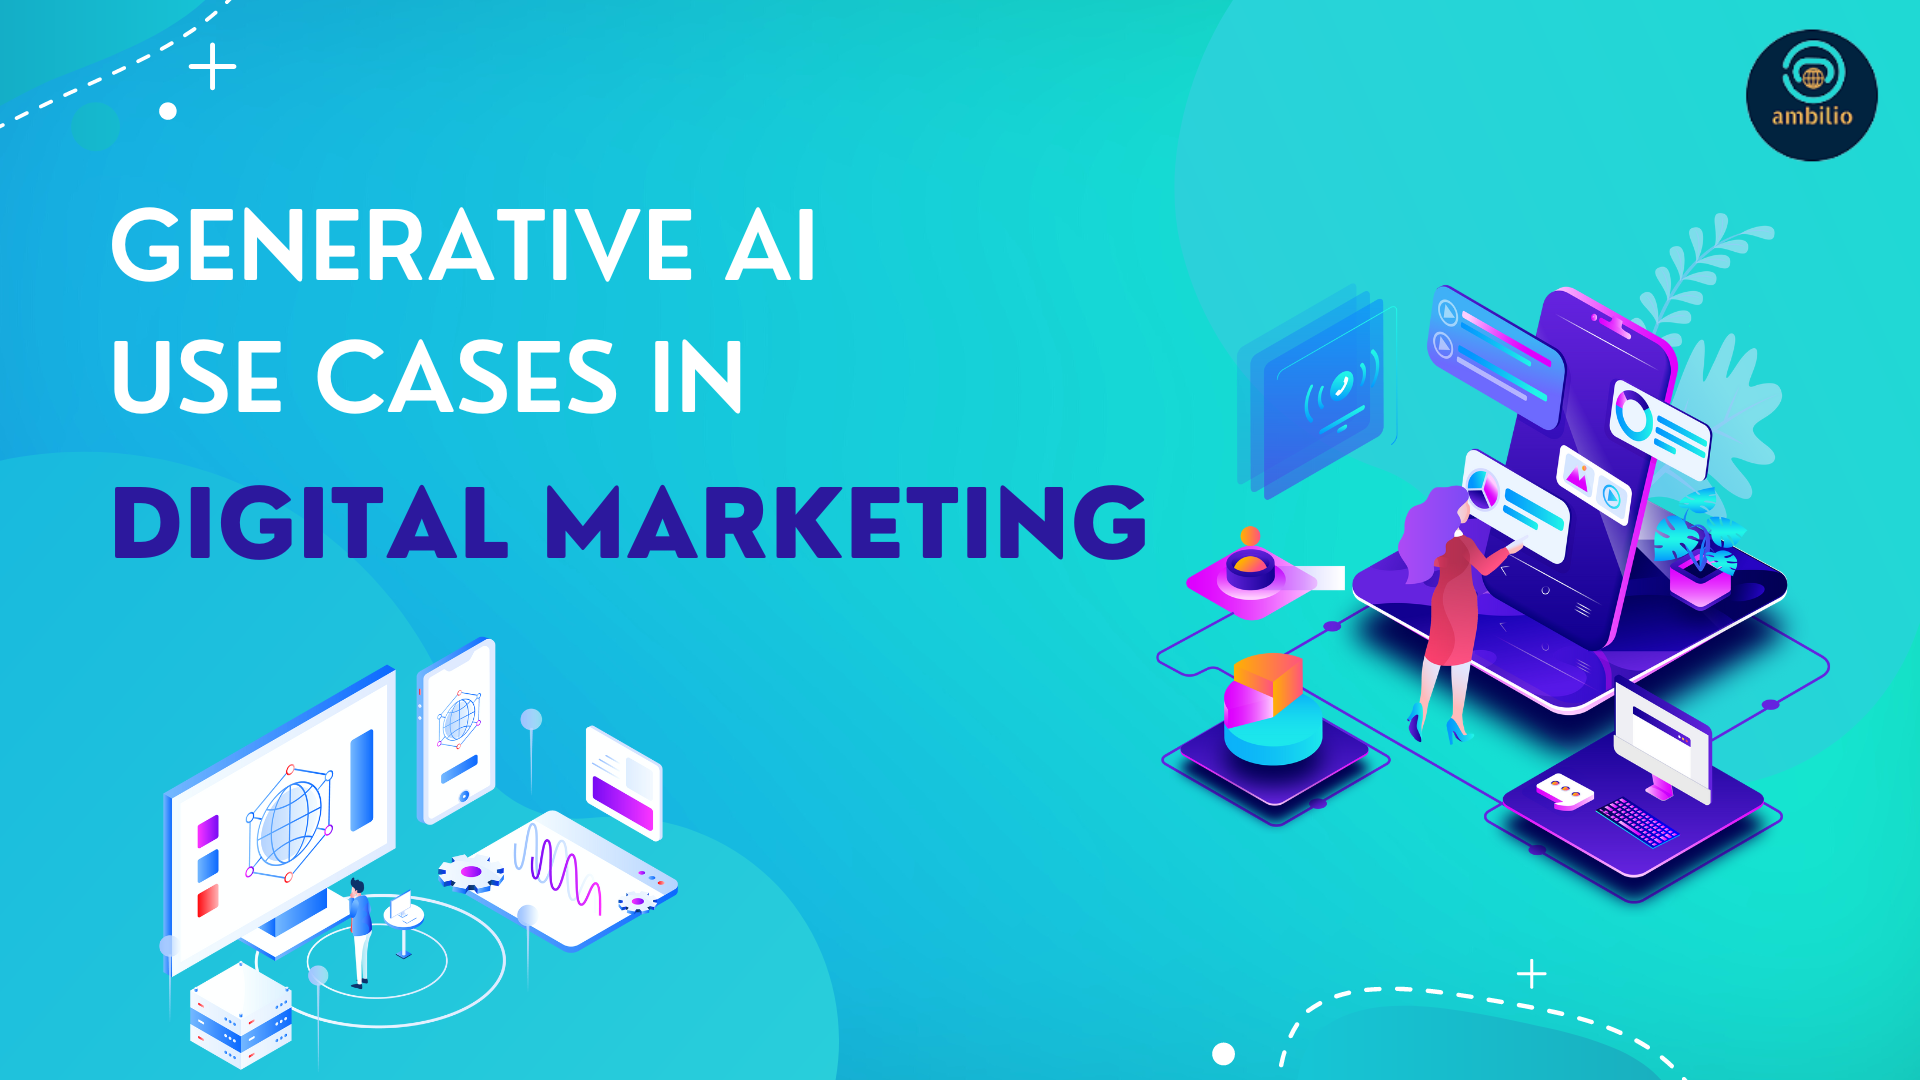 5 Use cases of Generative AI in Digital Marketing